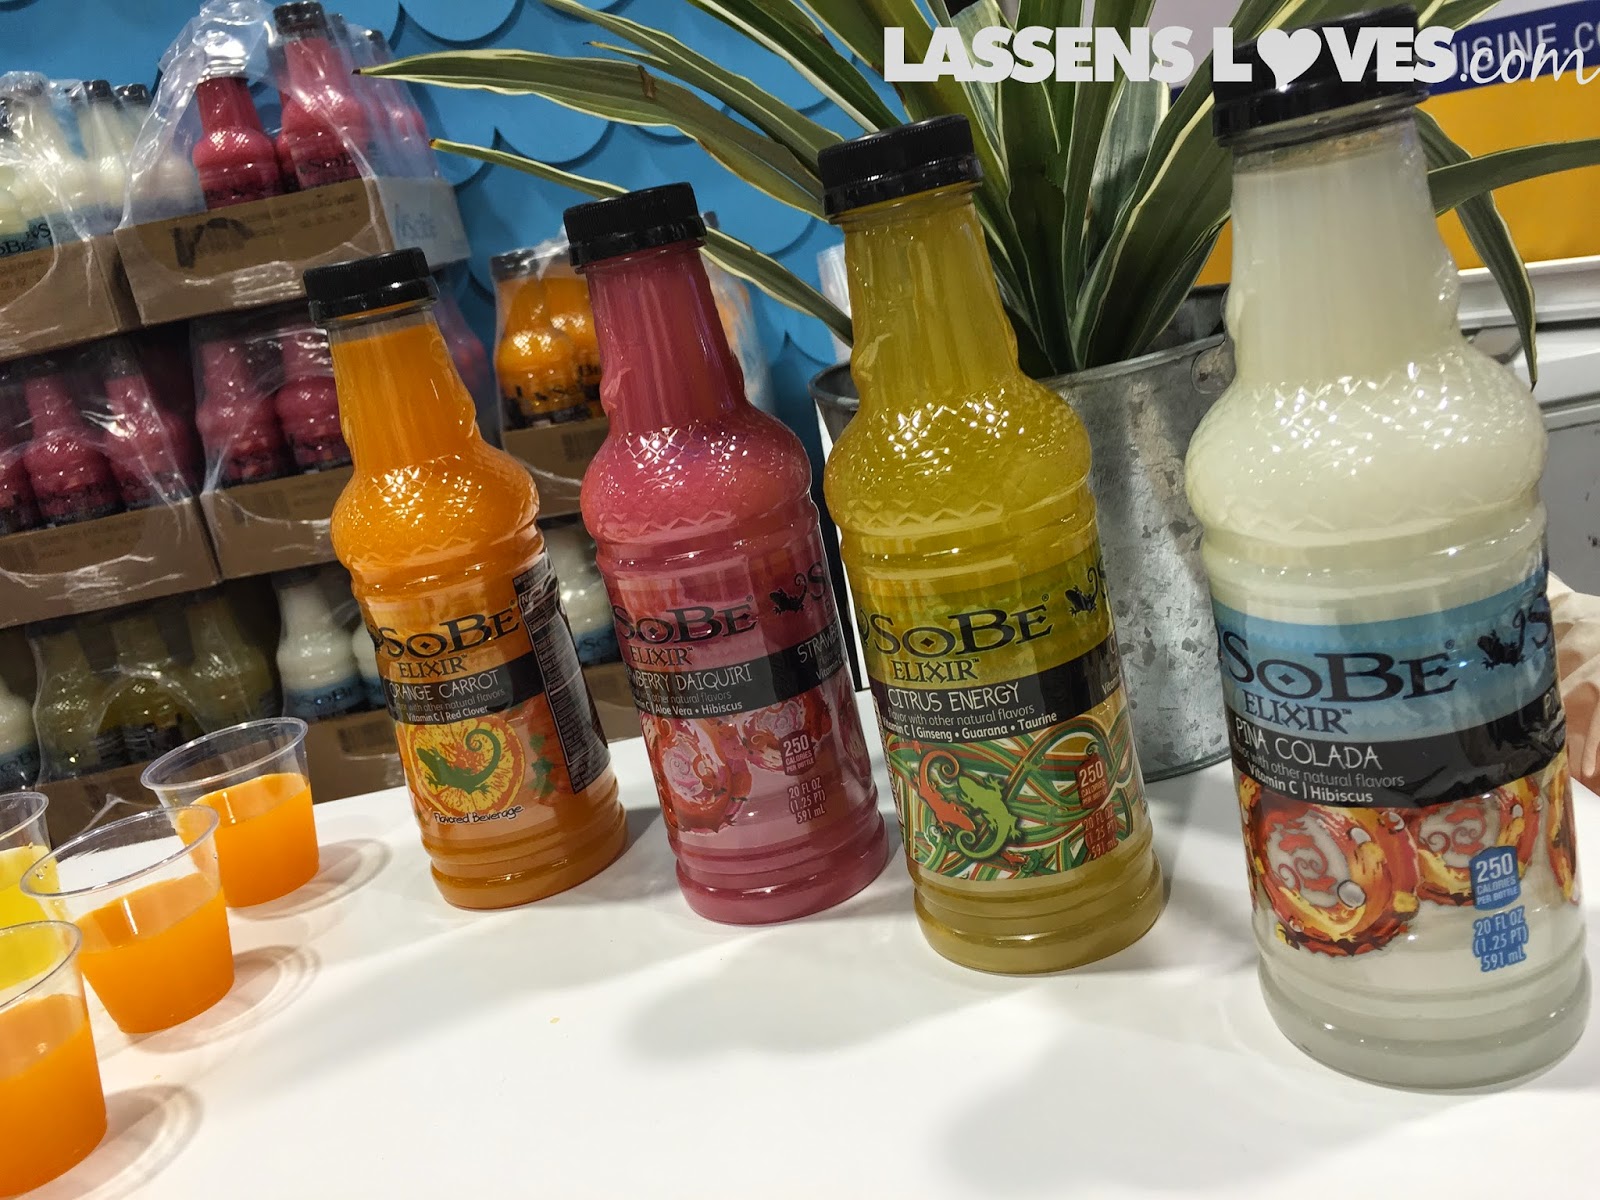 Expo+West+2015, Natural+Foods+Show, New+Natural+Products, sobe+elixir